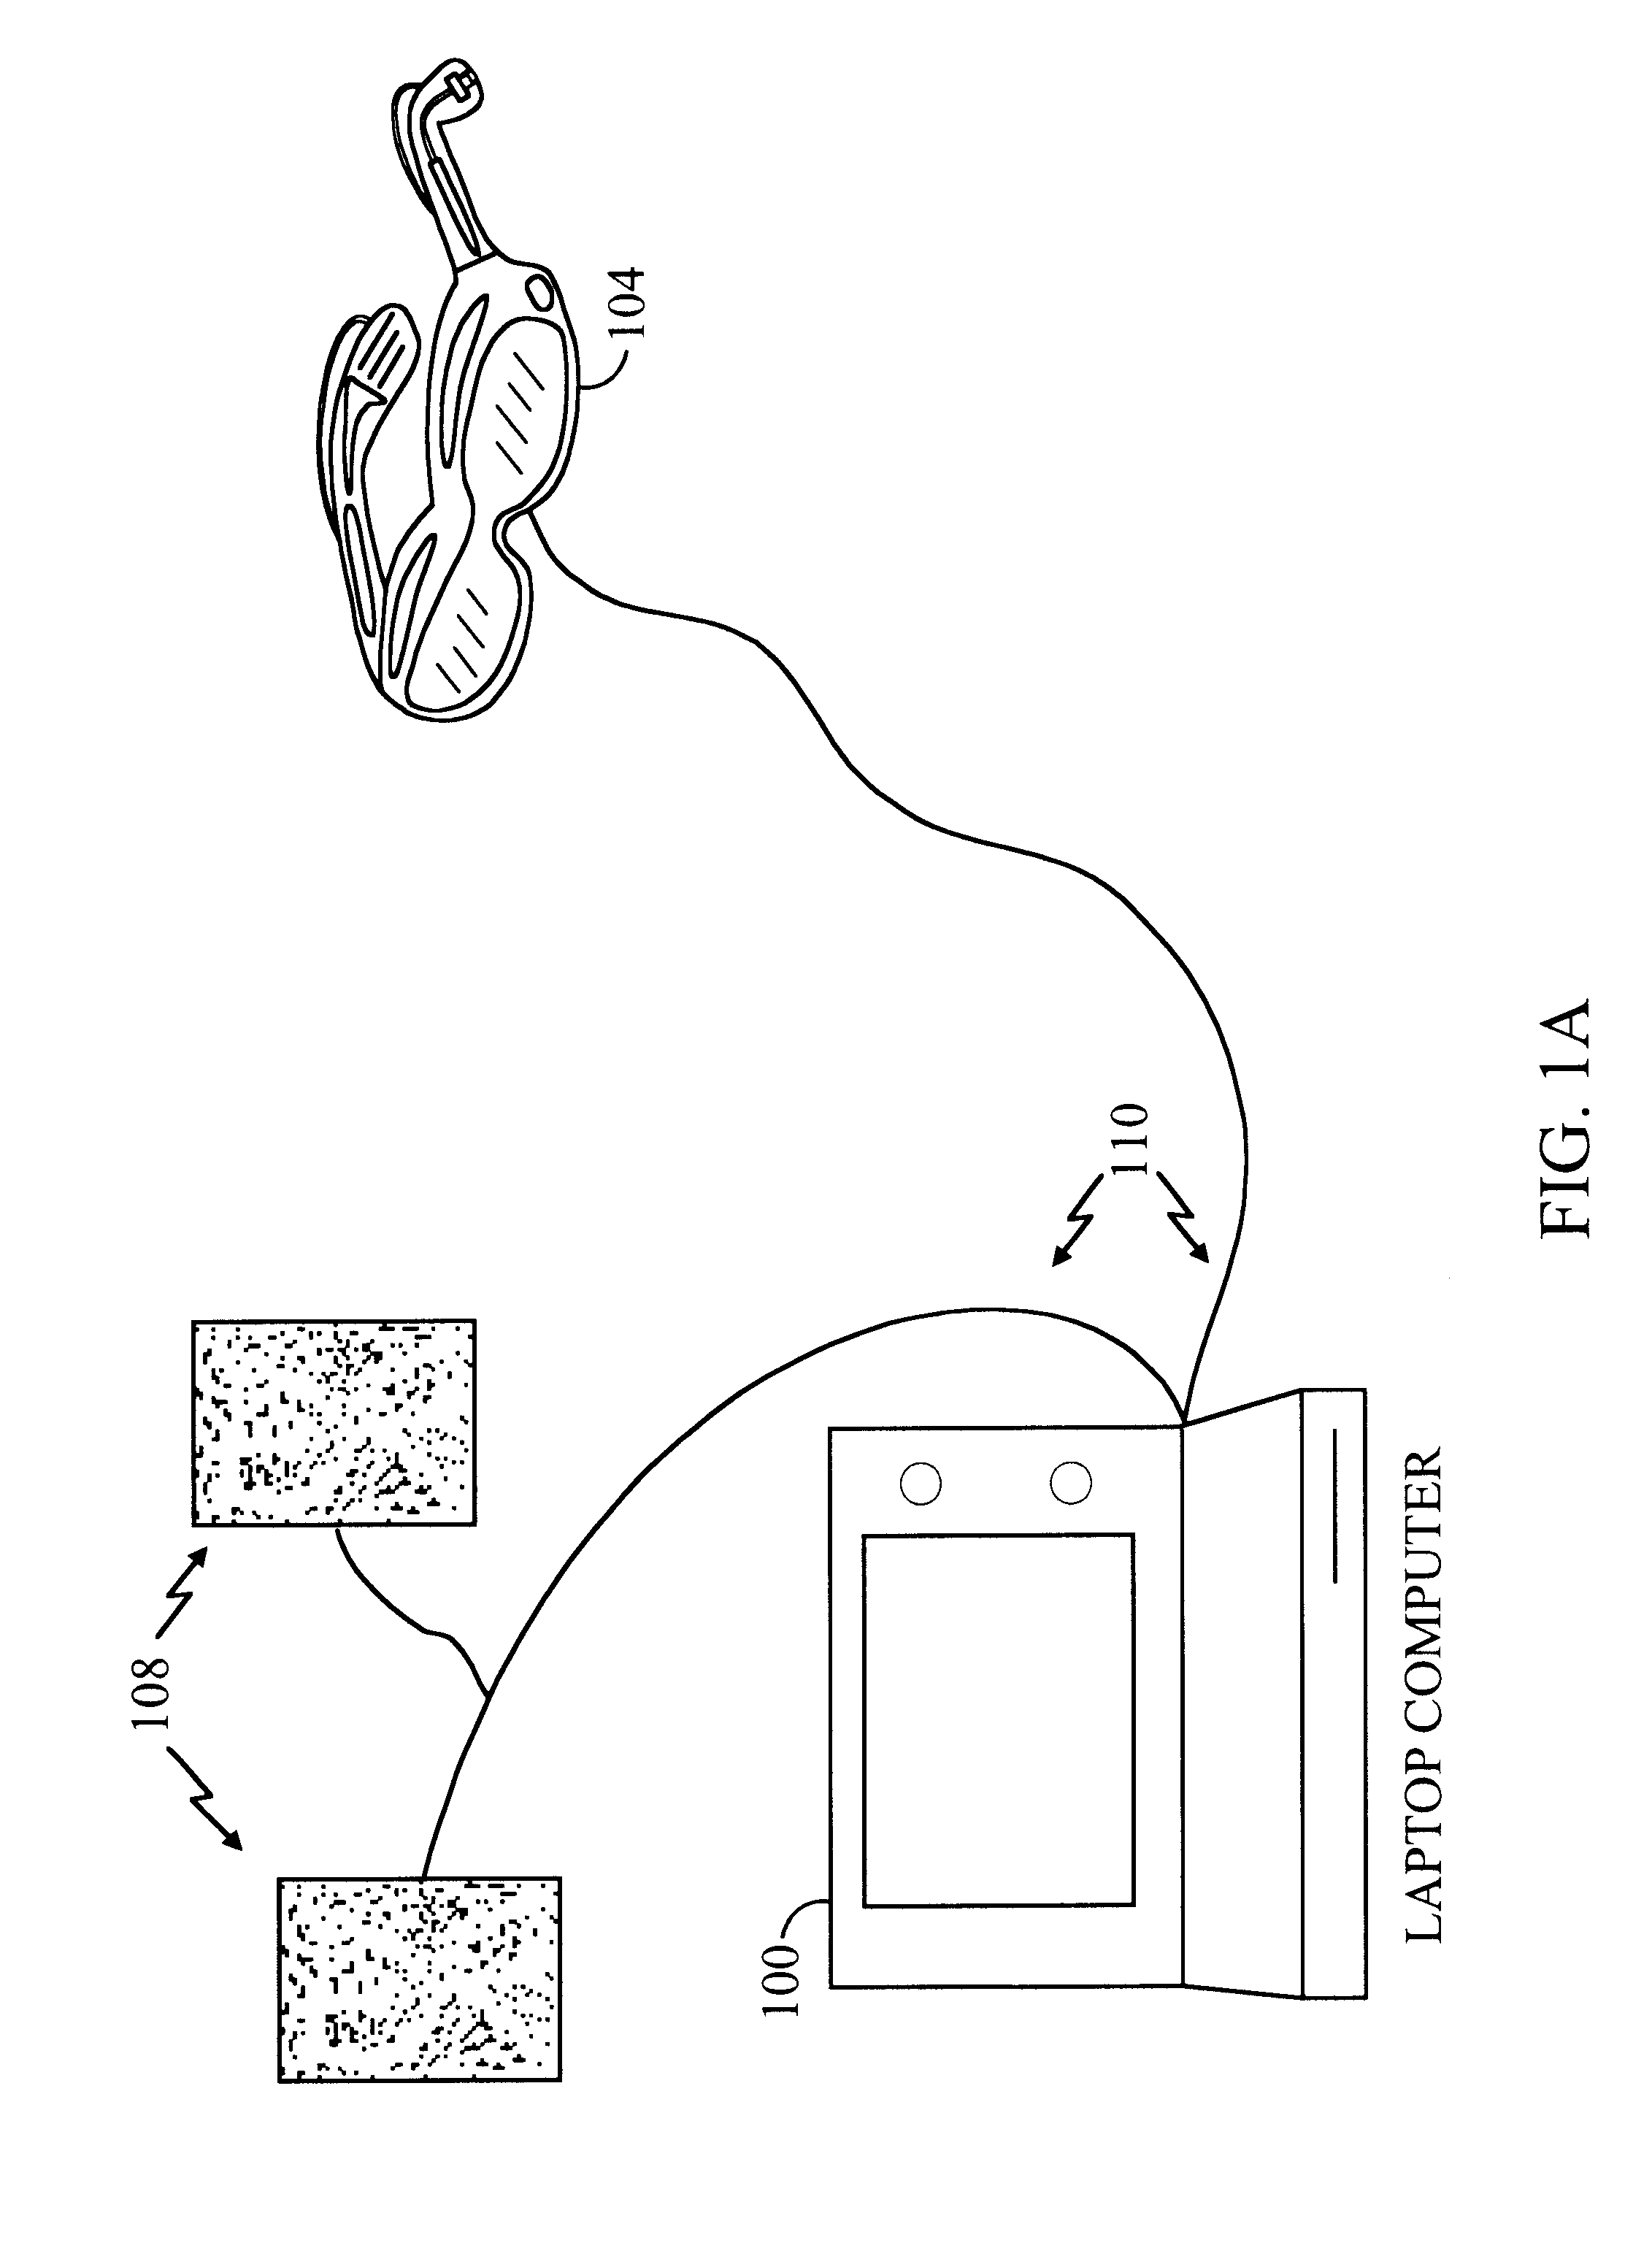 Generating and implementing a communication protocol and interface for high data rate signal transfer